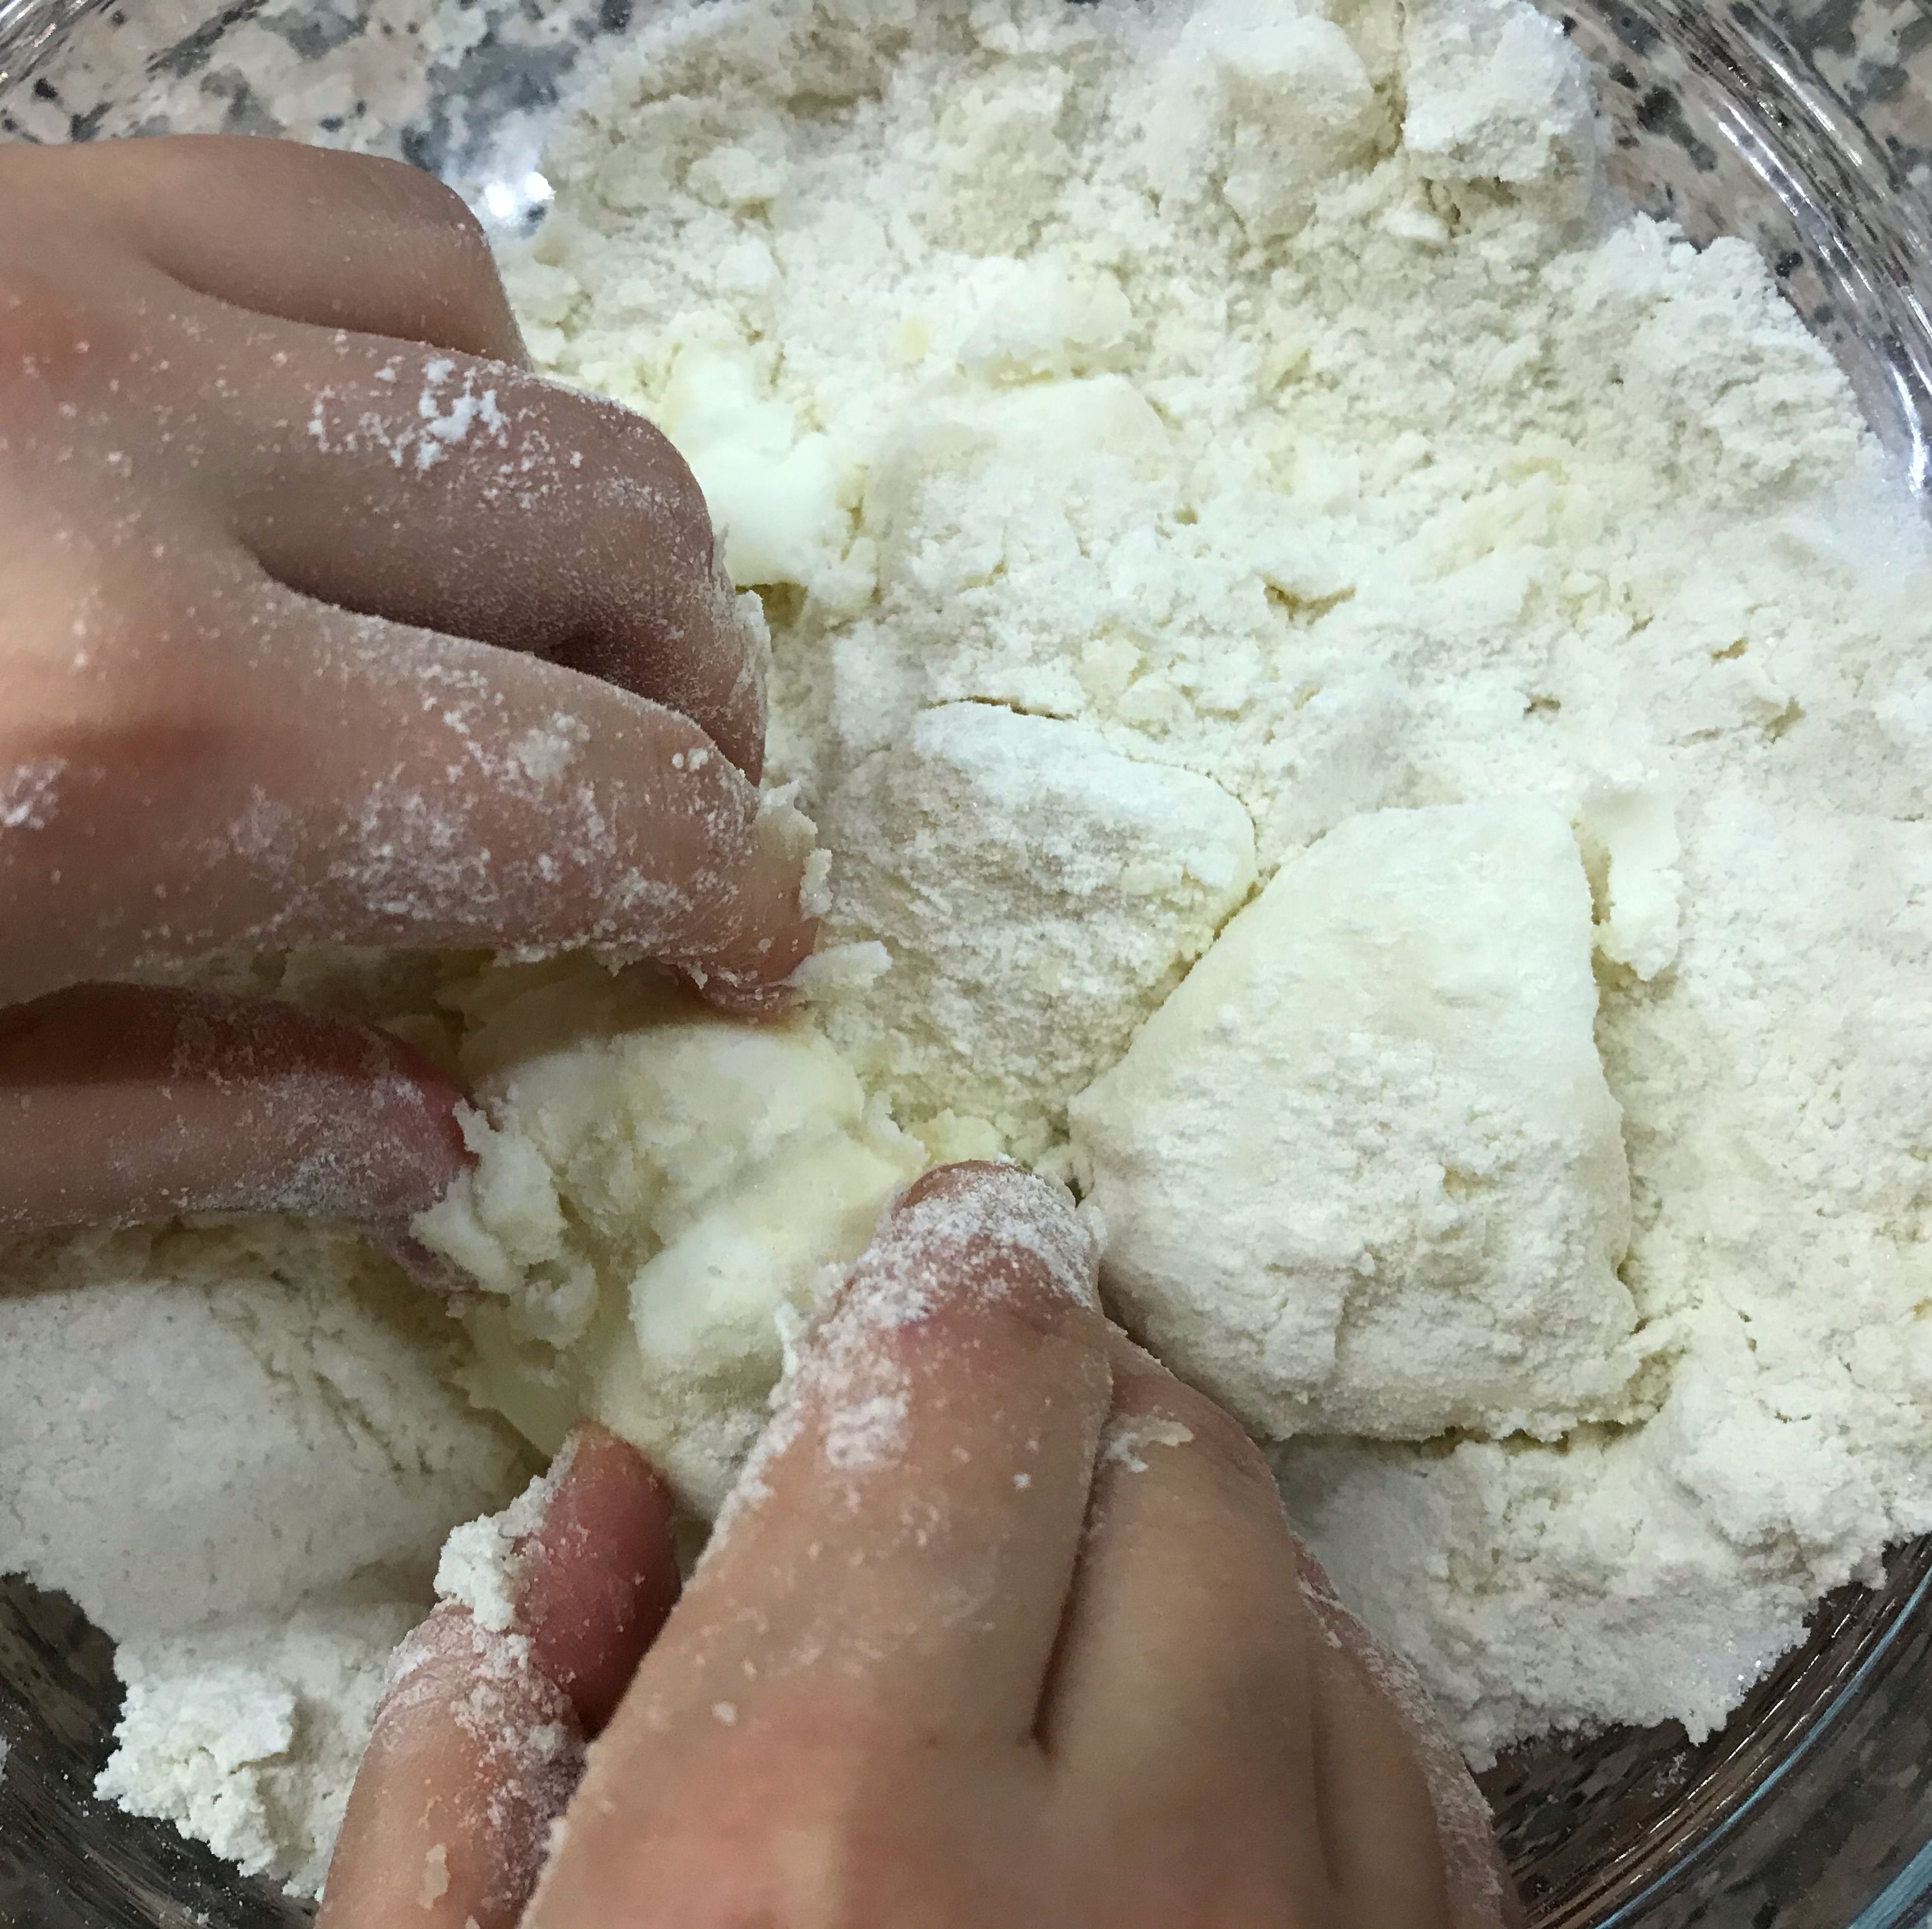 Put flour, sugar and butter in a bowl. You can use blender or blend with your fingertips like me. Don’t knead, just mix everything until it is like sand.